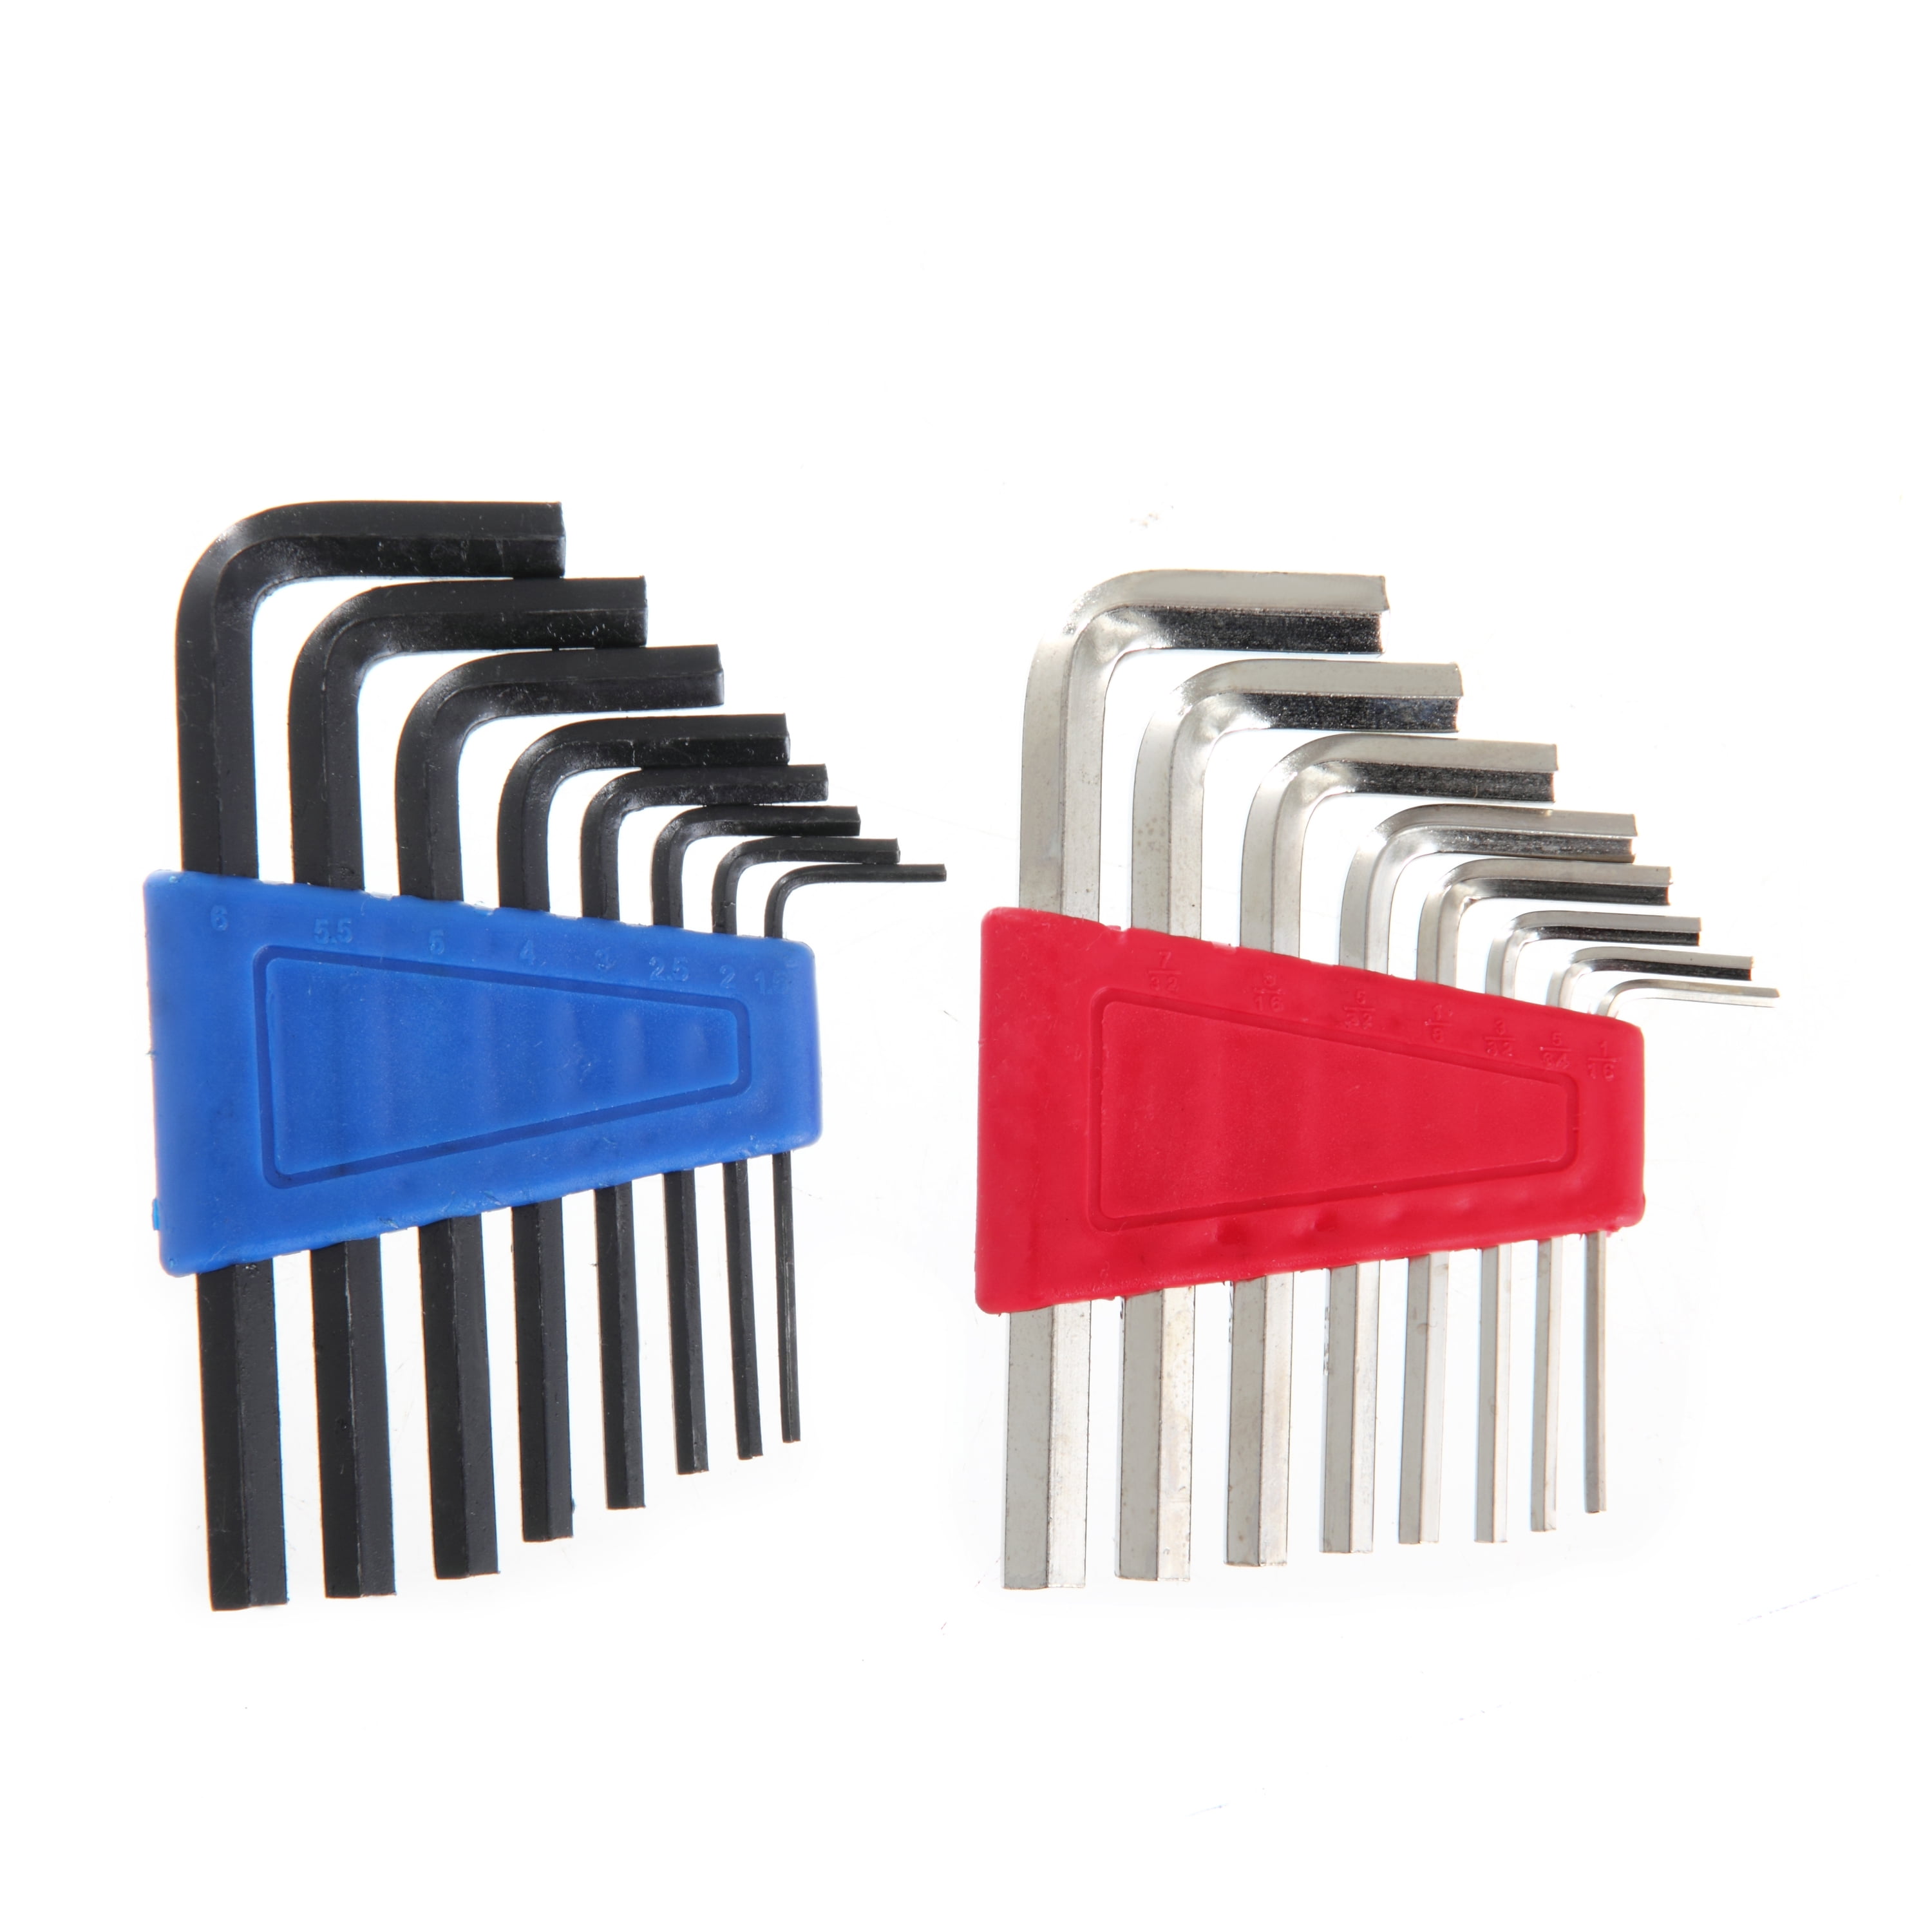 Details about   16 Piece Hex Key 1/8 Inches Standard Dogging With Full Loop Allen Wrench Door 